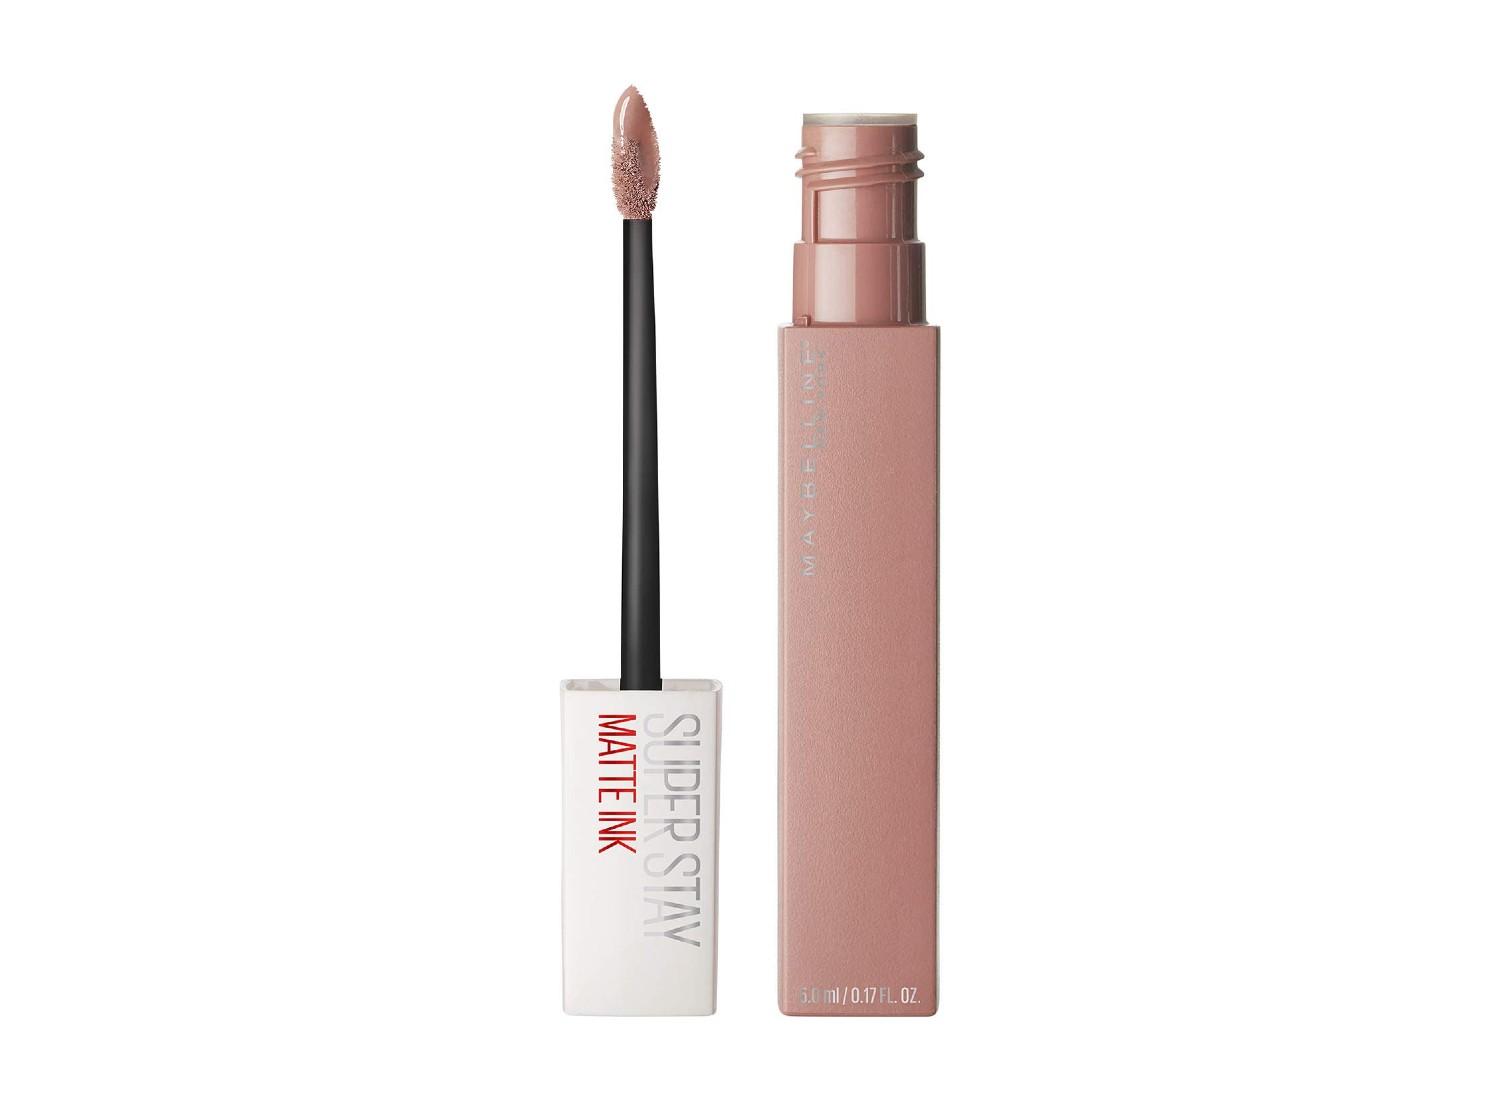 An open bottle and applicator of Maybelline lipstick.